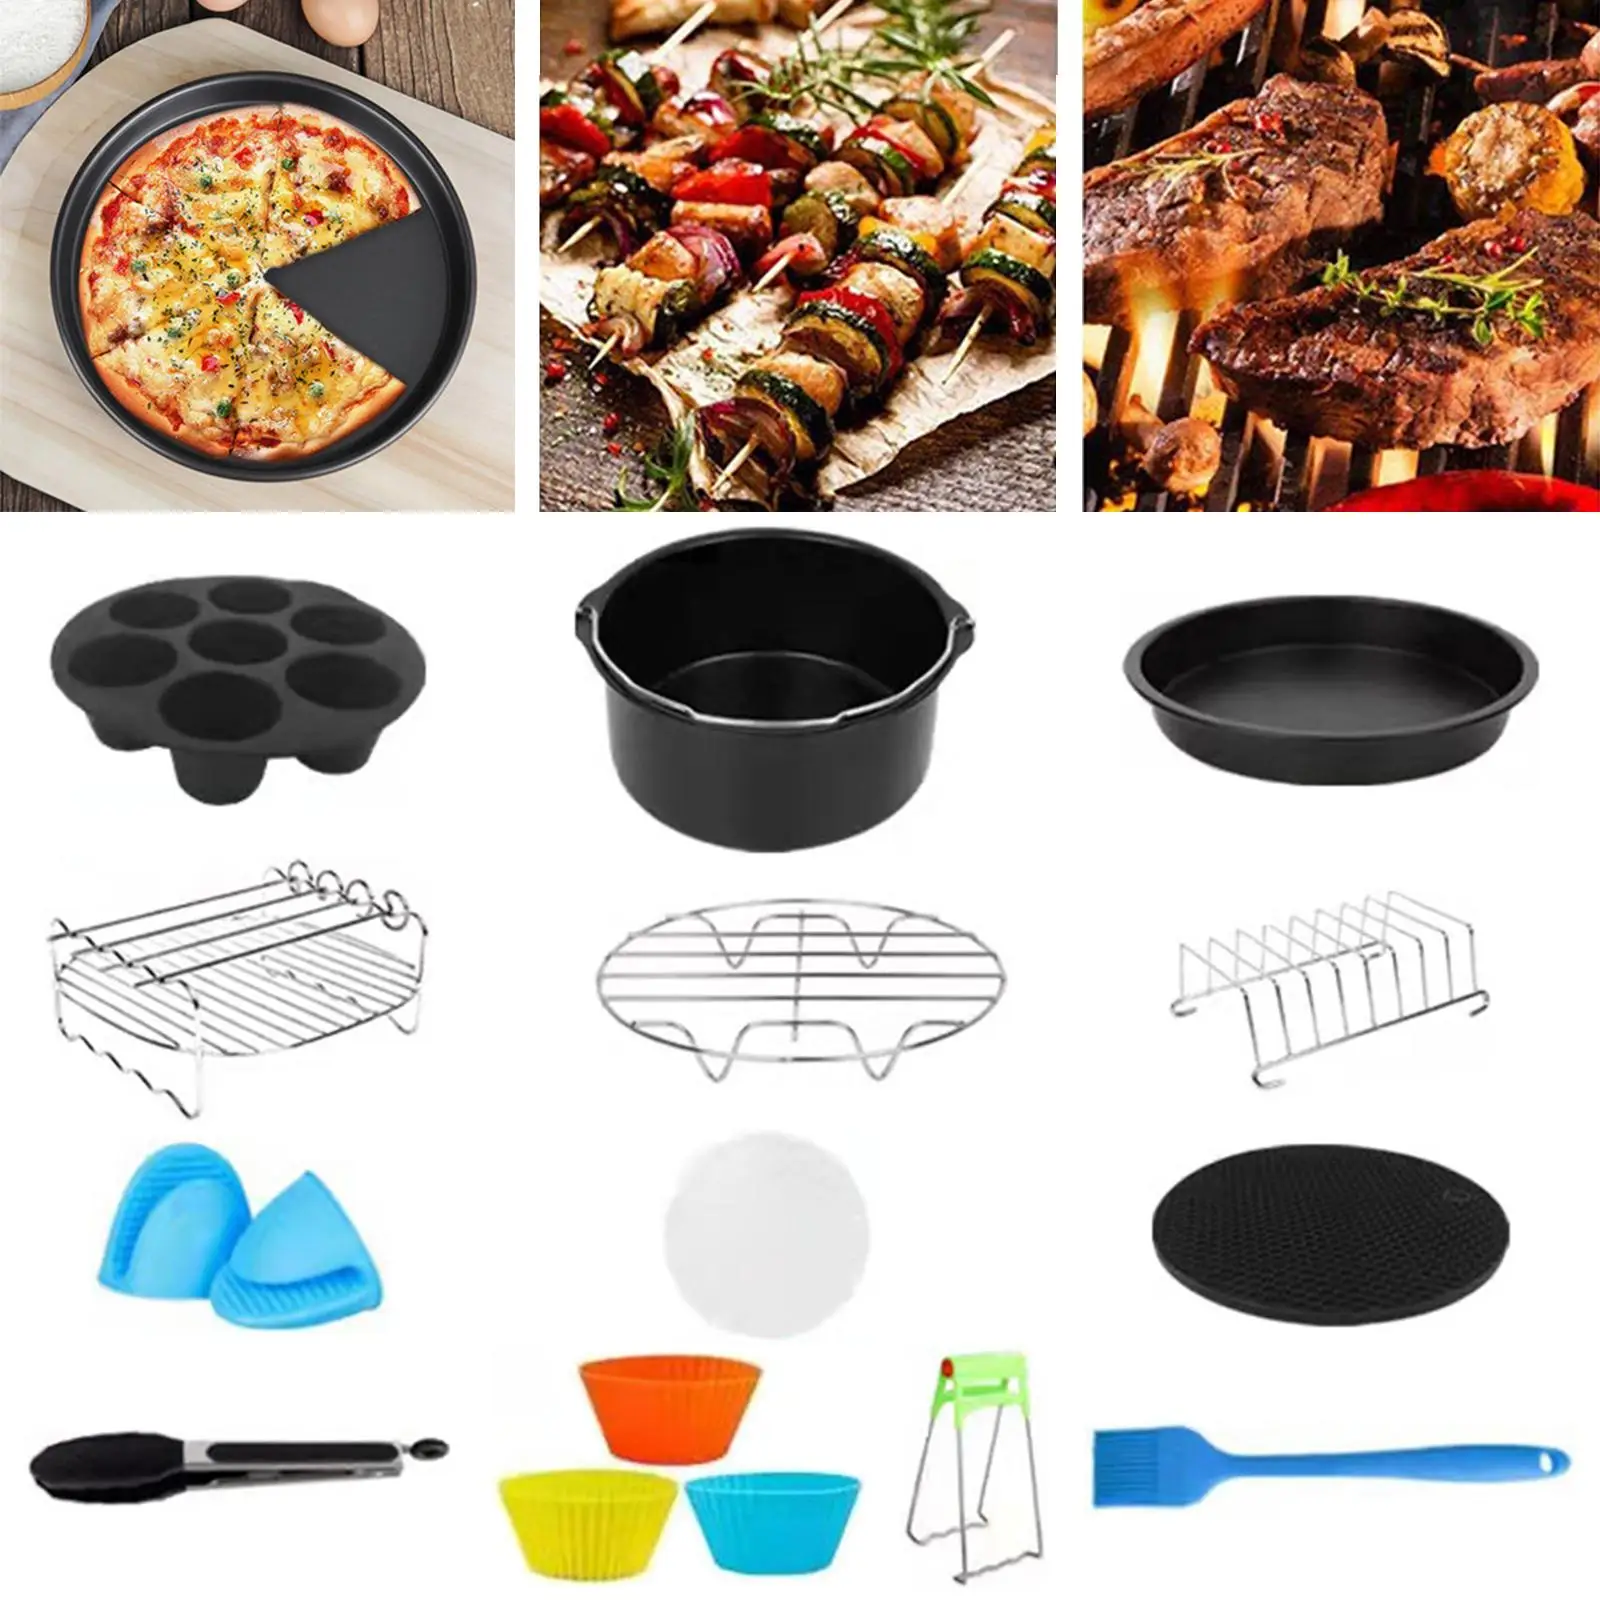 8 inch Air Fryer Accessories Silicone Clip Double Grill Silicone Pot Mat 13Pcs Air Fryer Accessory Kit for Baking Home BBQ